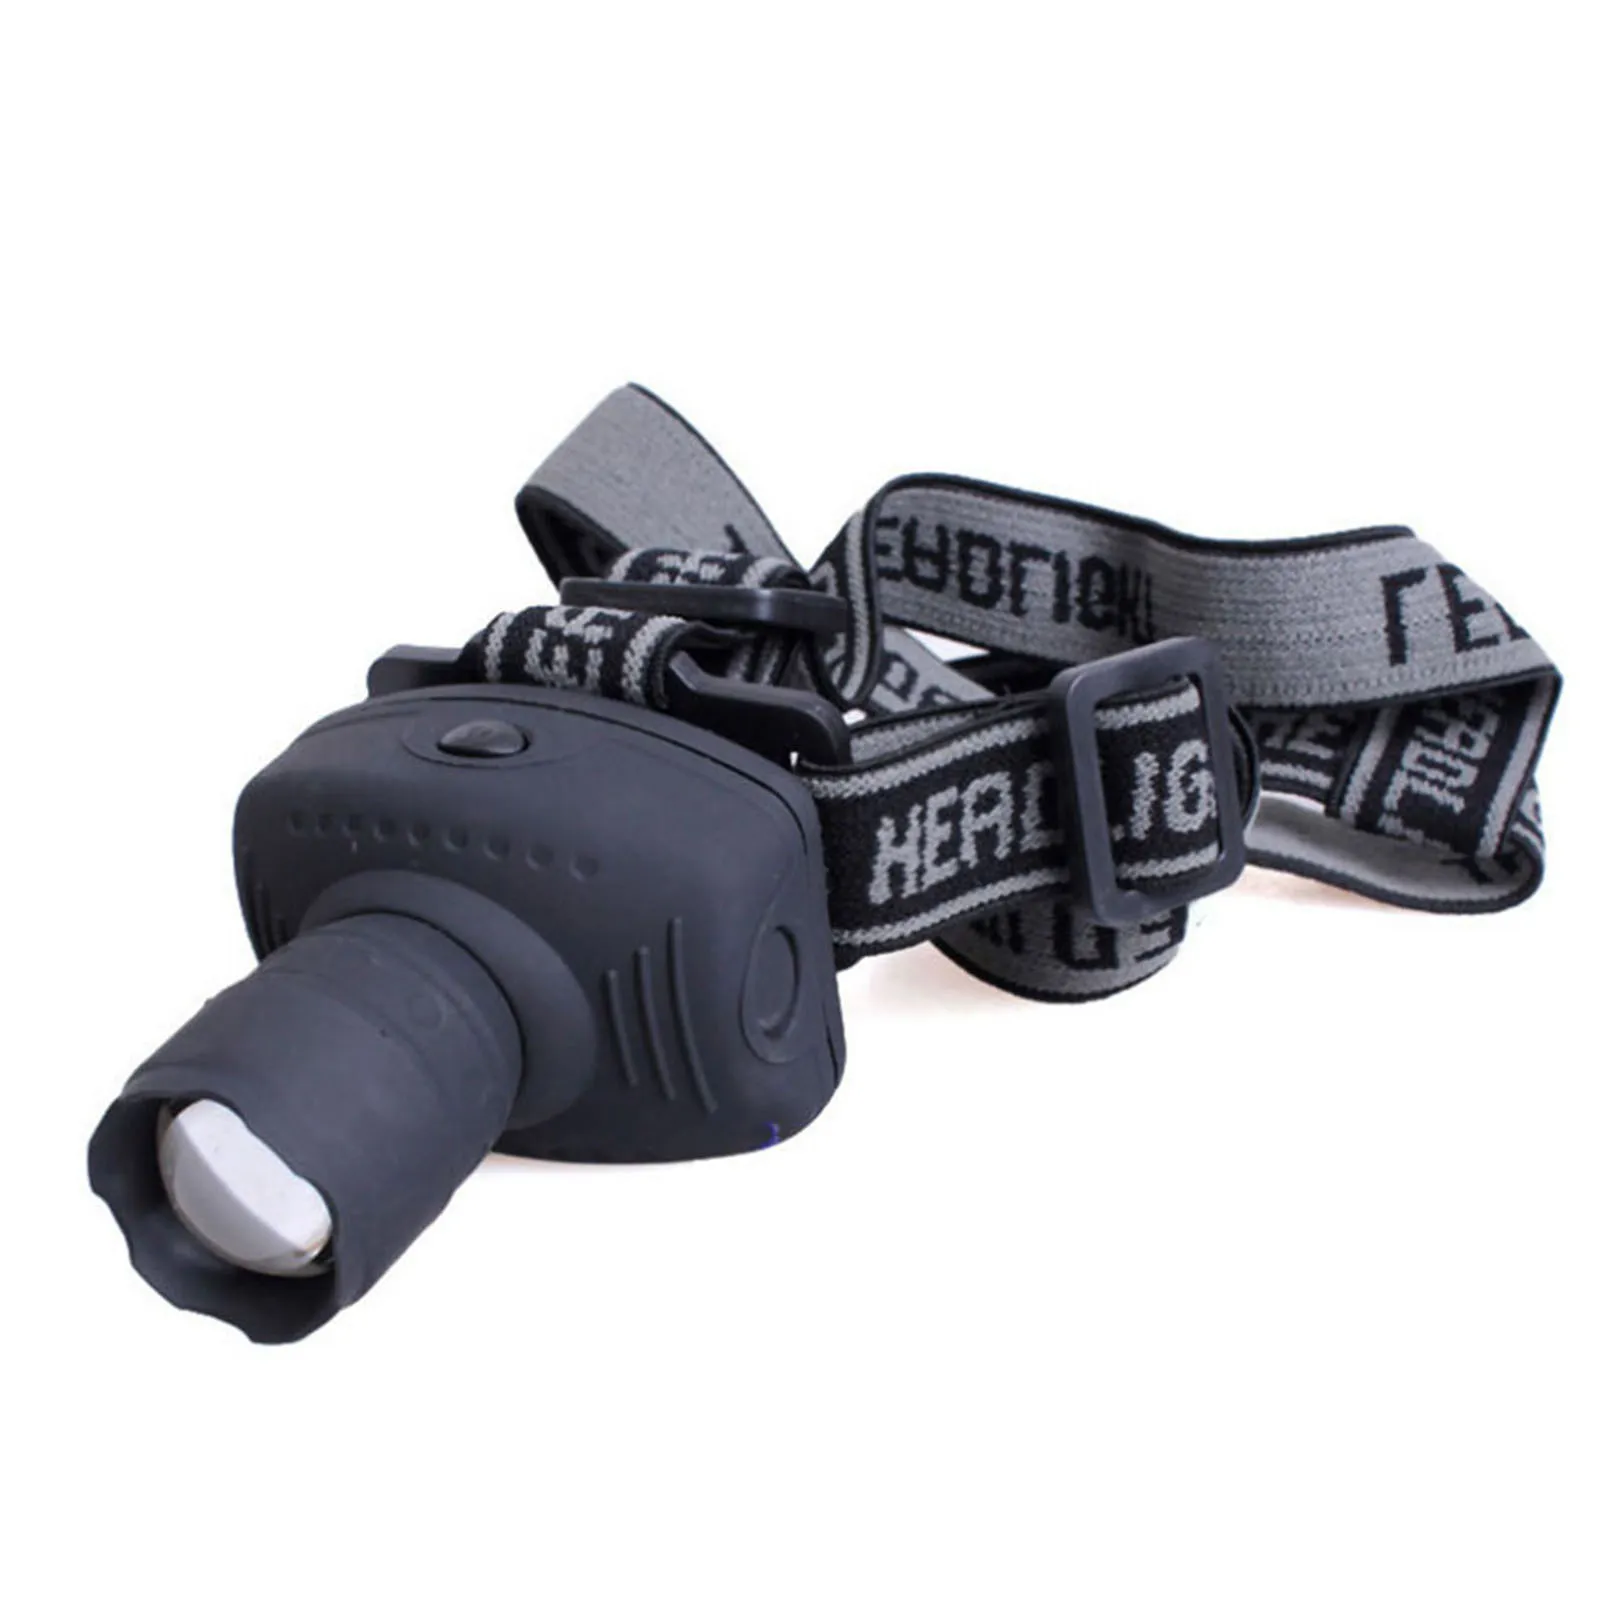 

3W LED Outdoor Camping Headlamp Frontal Lantern Zoomable Head Torch Light for Camping Hiking Fishing